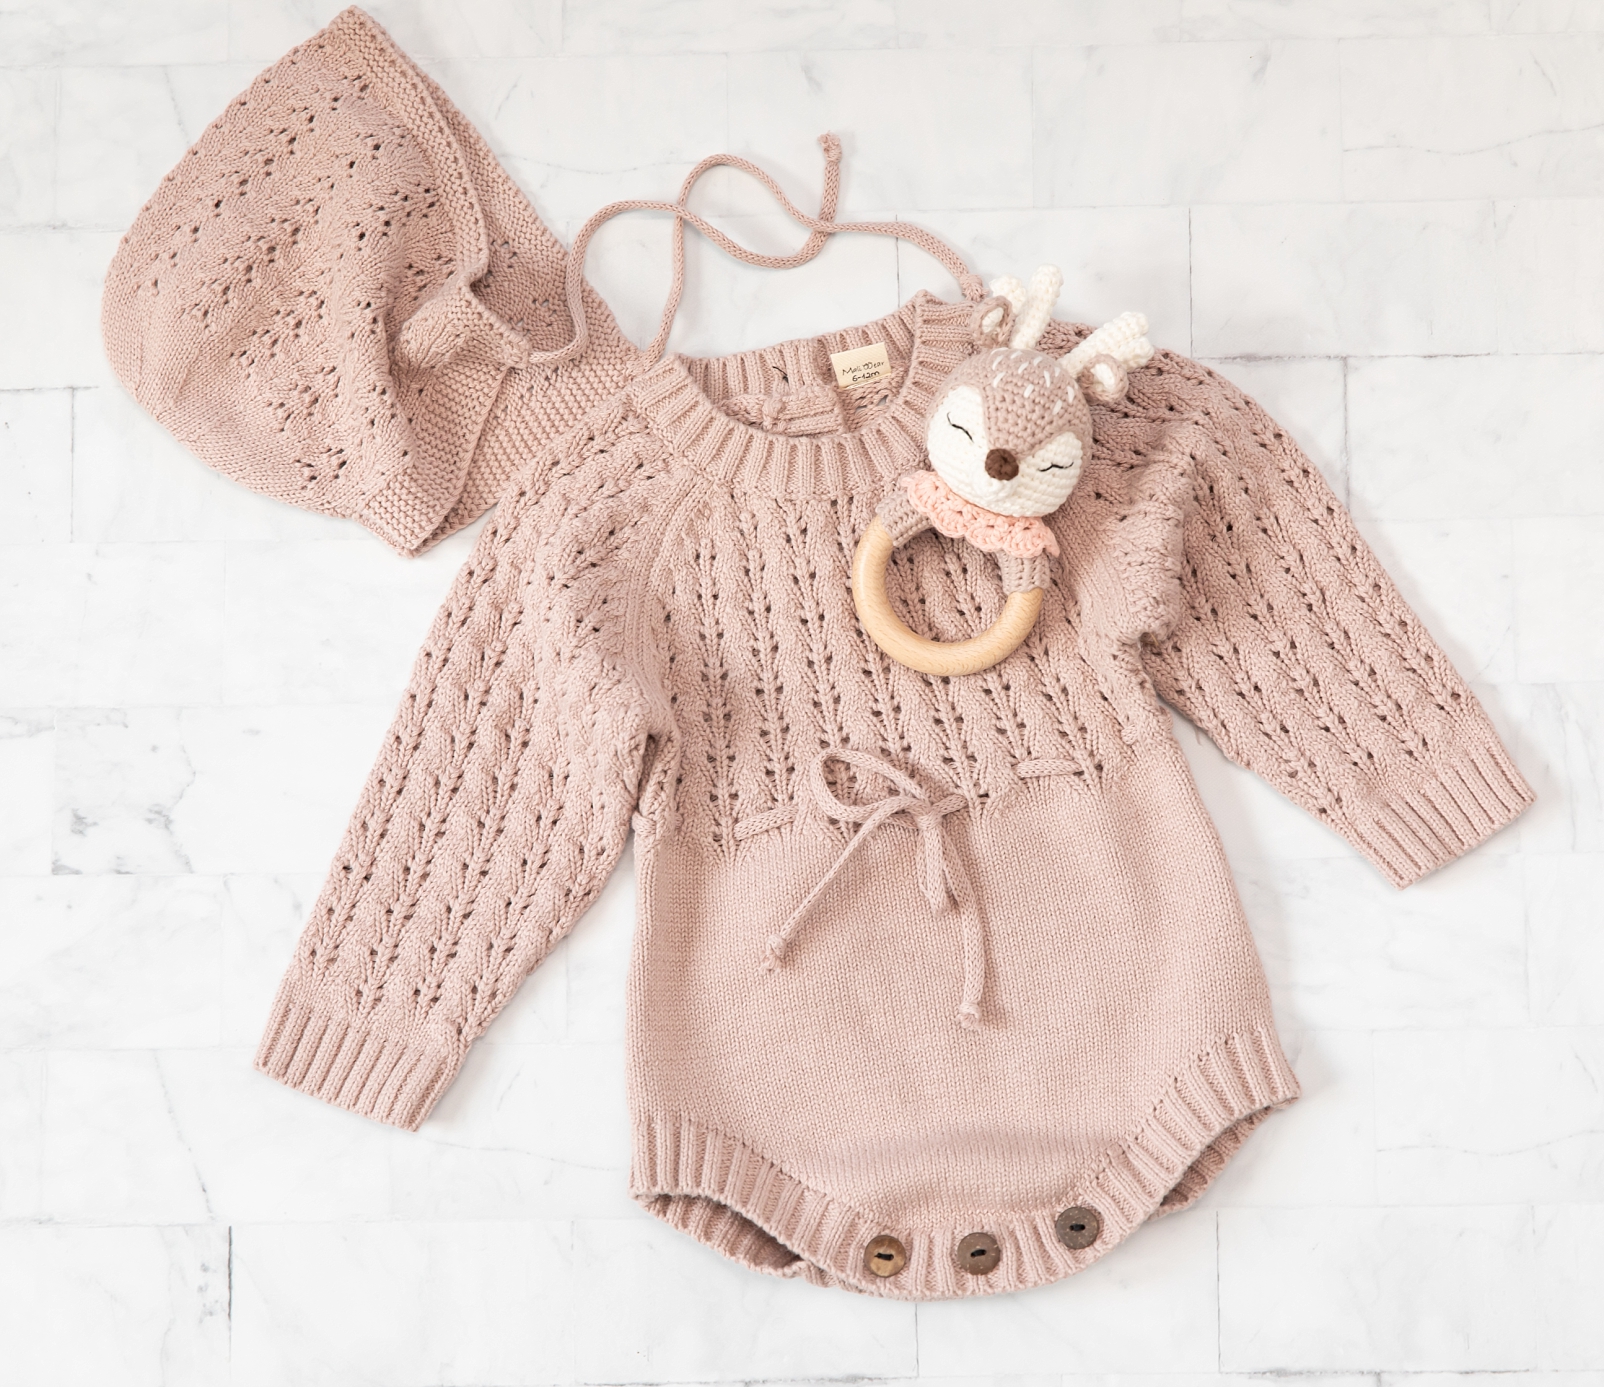 knit baby outfit, bonnet, and teether in mauve